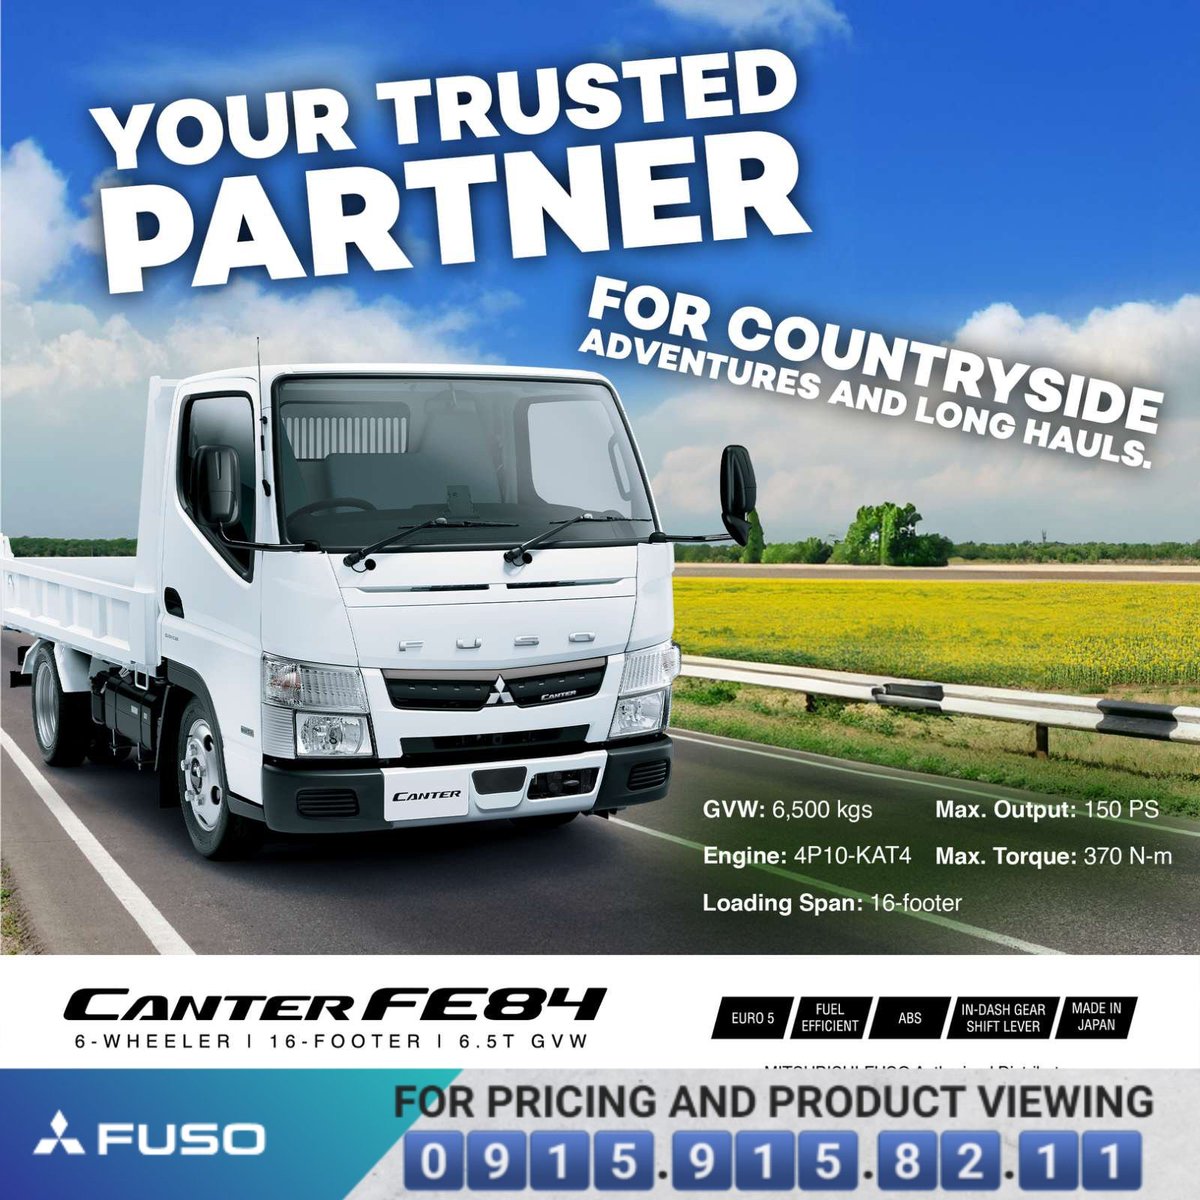 Beat the heat with our FUSO Canter—your go-to for countryside adventures and long hauls! Where to next?

This is for serious inquiry only.
0️⃣9️⃣1️⃣5️⃣.9️⃣1️⃣5️⃣.8️⃣2️⃣.1️⃣1️⃣
or mitsubishifusopilipinas.com/fuso-trucks/

#L300 #Mitsubishi #fuso #canter #TheBestJustGotBetter #LightDutyLegend #HarvestTime